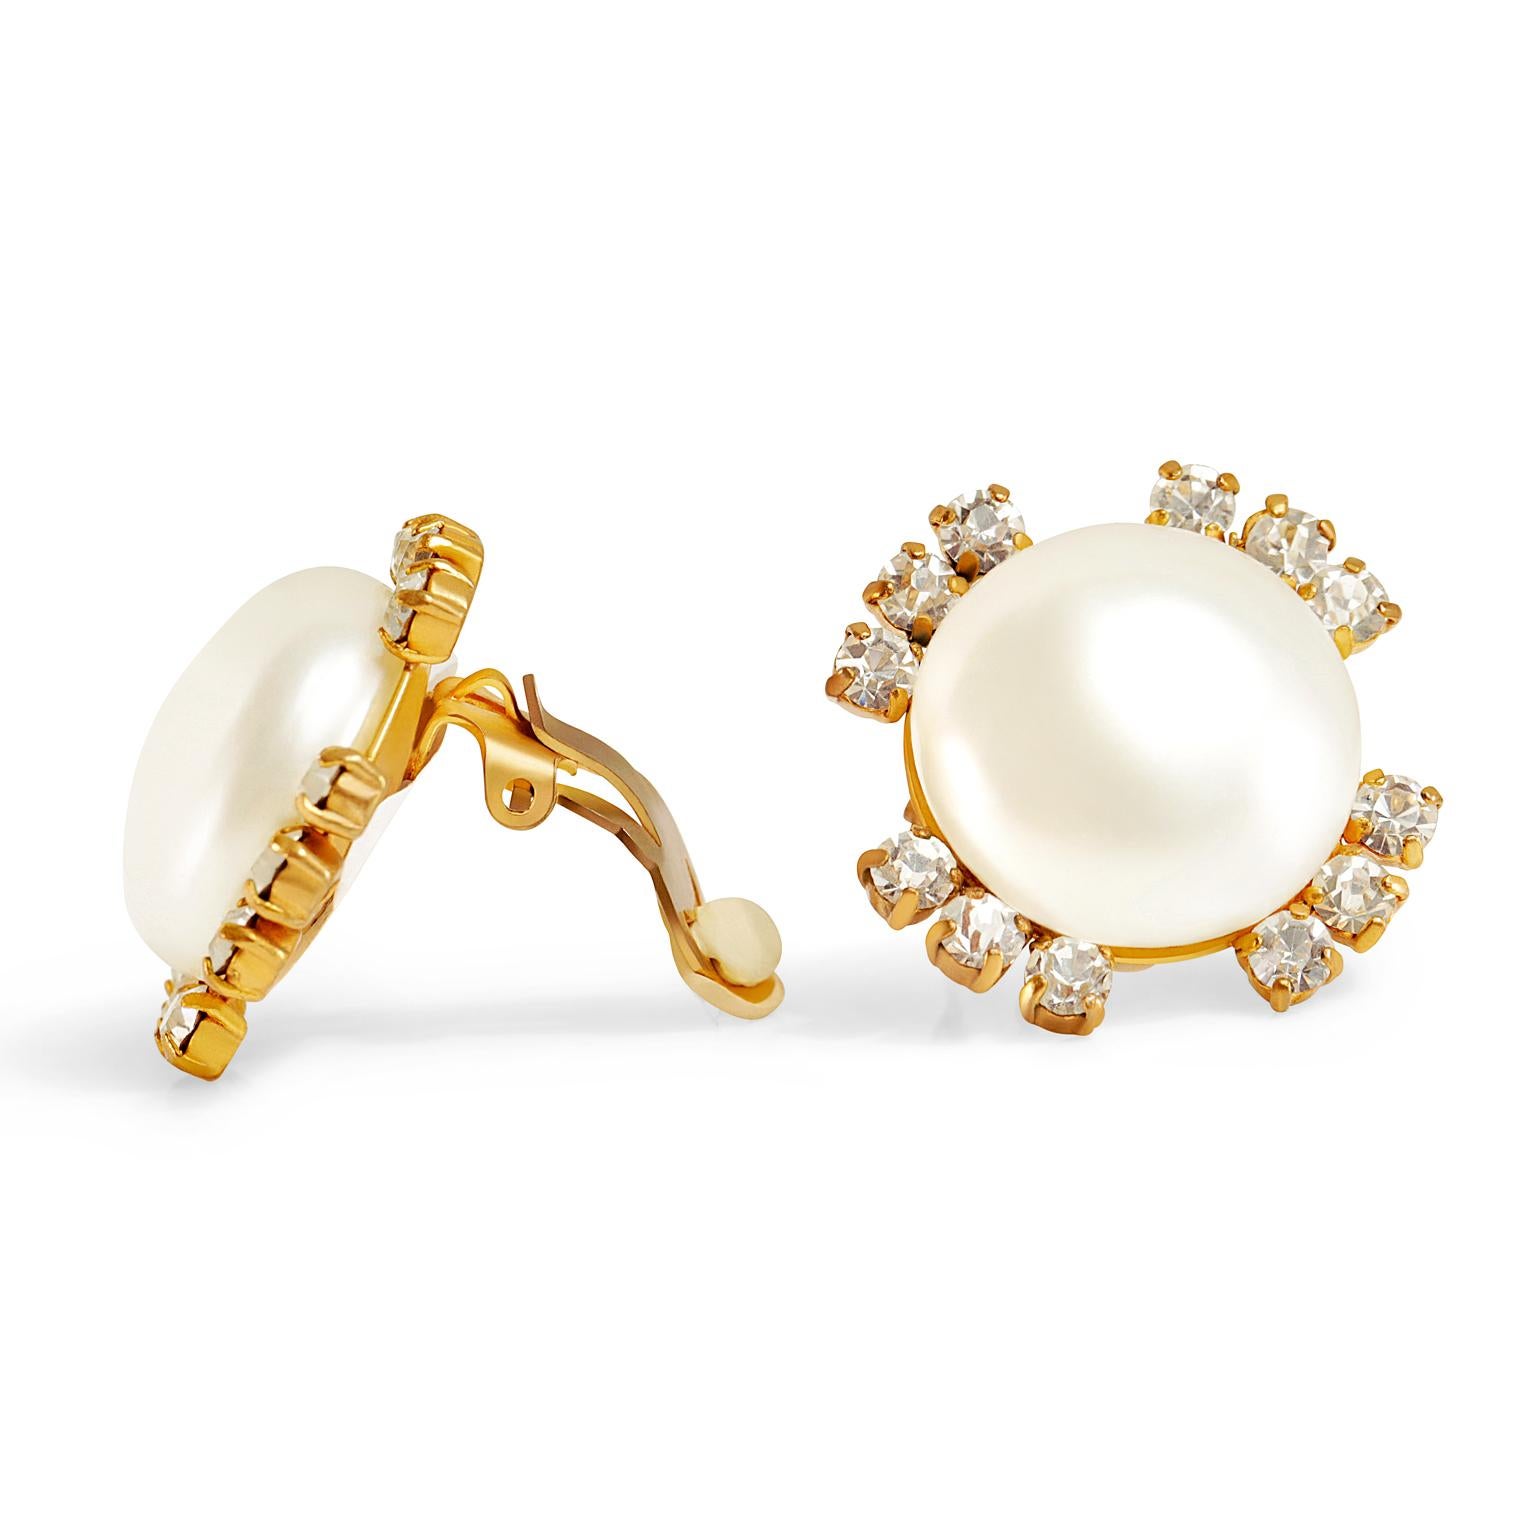 These authentic Chanel Pearl and Crystal Earrings are in excellent condition.  Large round faux pearl with gold surround and twelve crystal embellishments form a simple flower. Clip on closure. Made in France.

